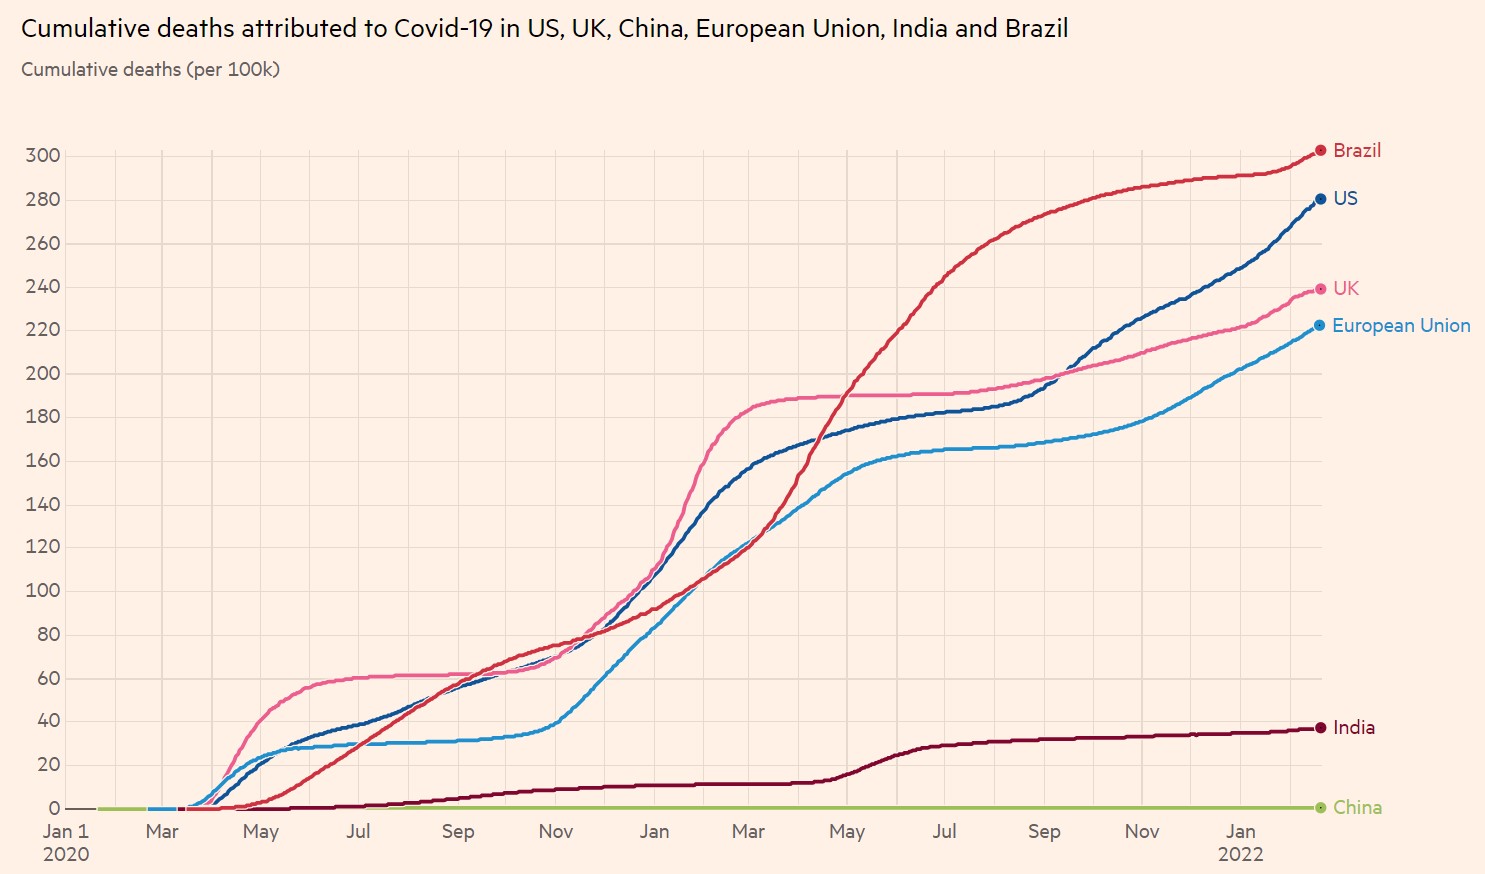 Cumulative deaths attributed to Covid-19 per 100k US UK China EU India Brazil 1-1-2020 to 20-2-2022 - enlarge